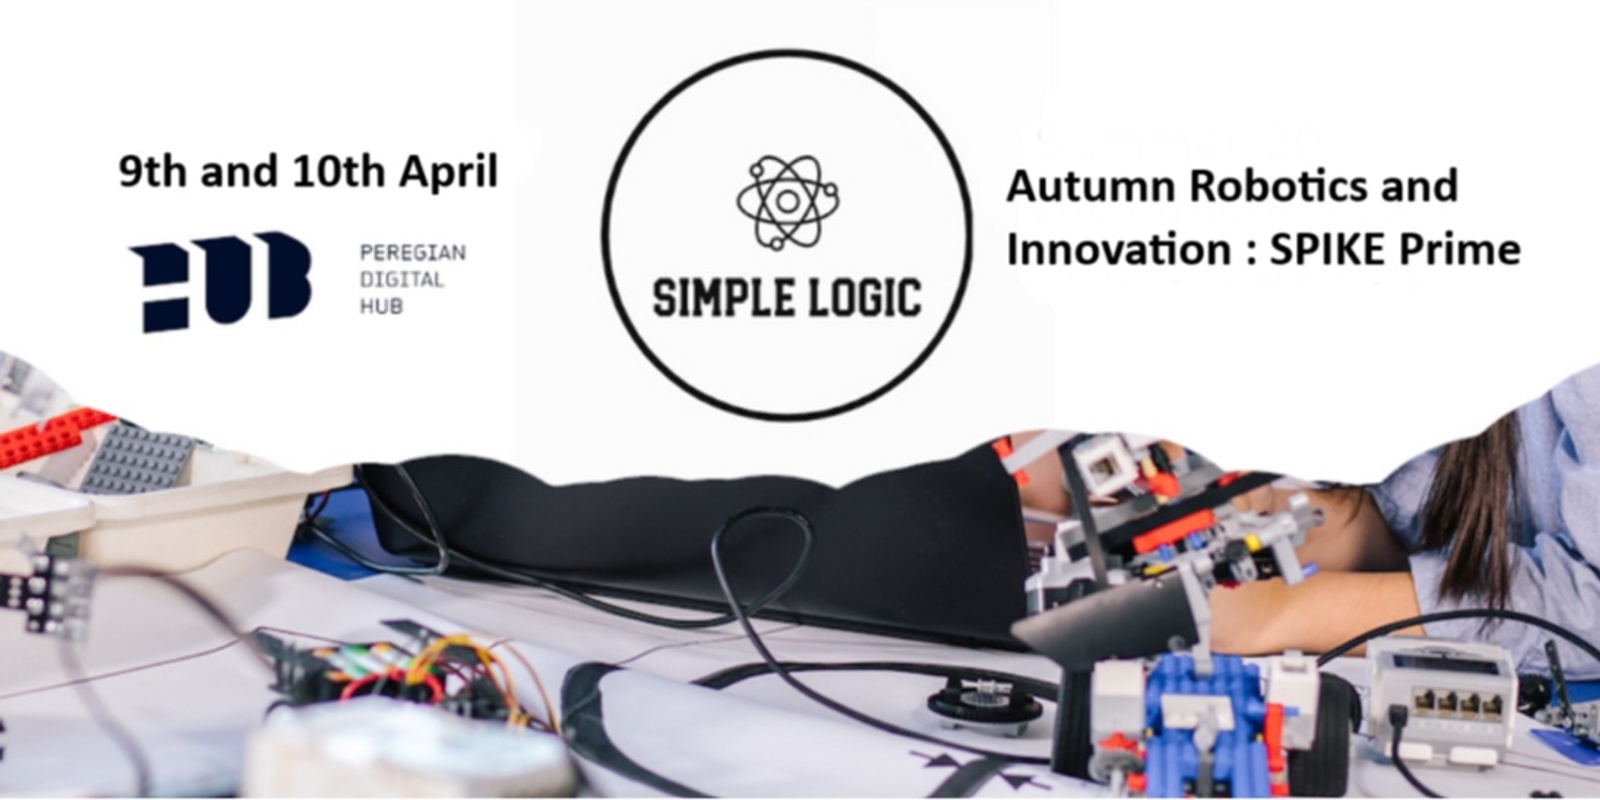 Banner image for Autumn Robotics and Innovation : SPIKE Prime 